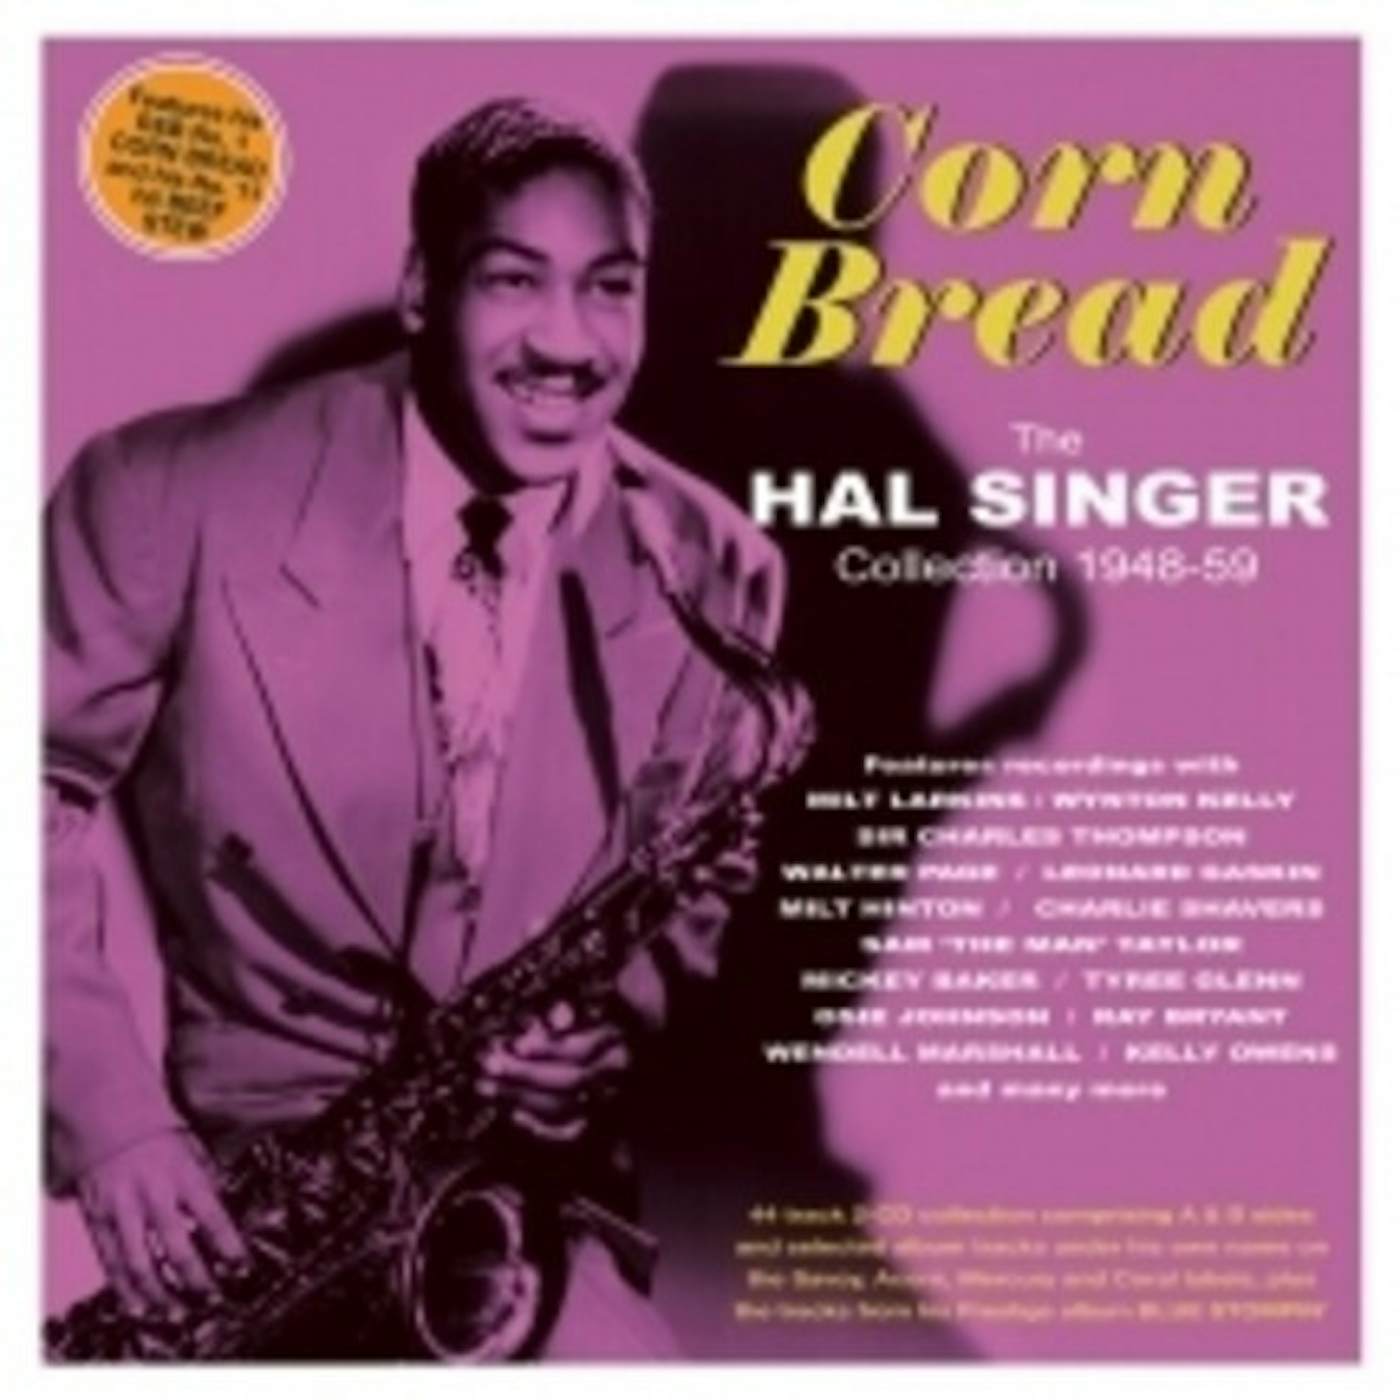 CORN BREAD: THE HAL SINGER COLLECTION 1948-59 CD